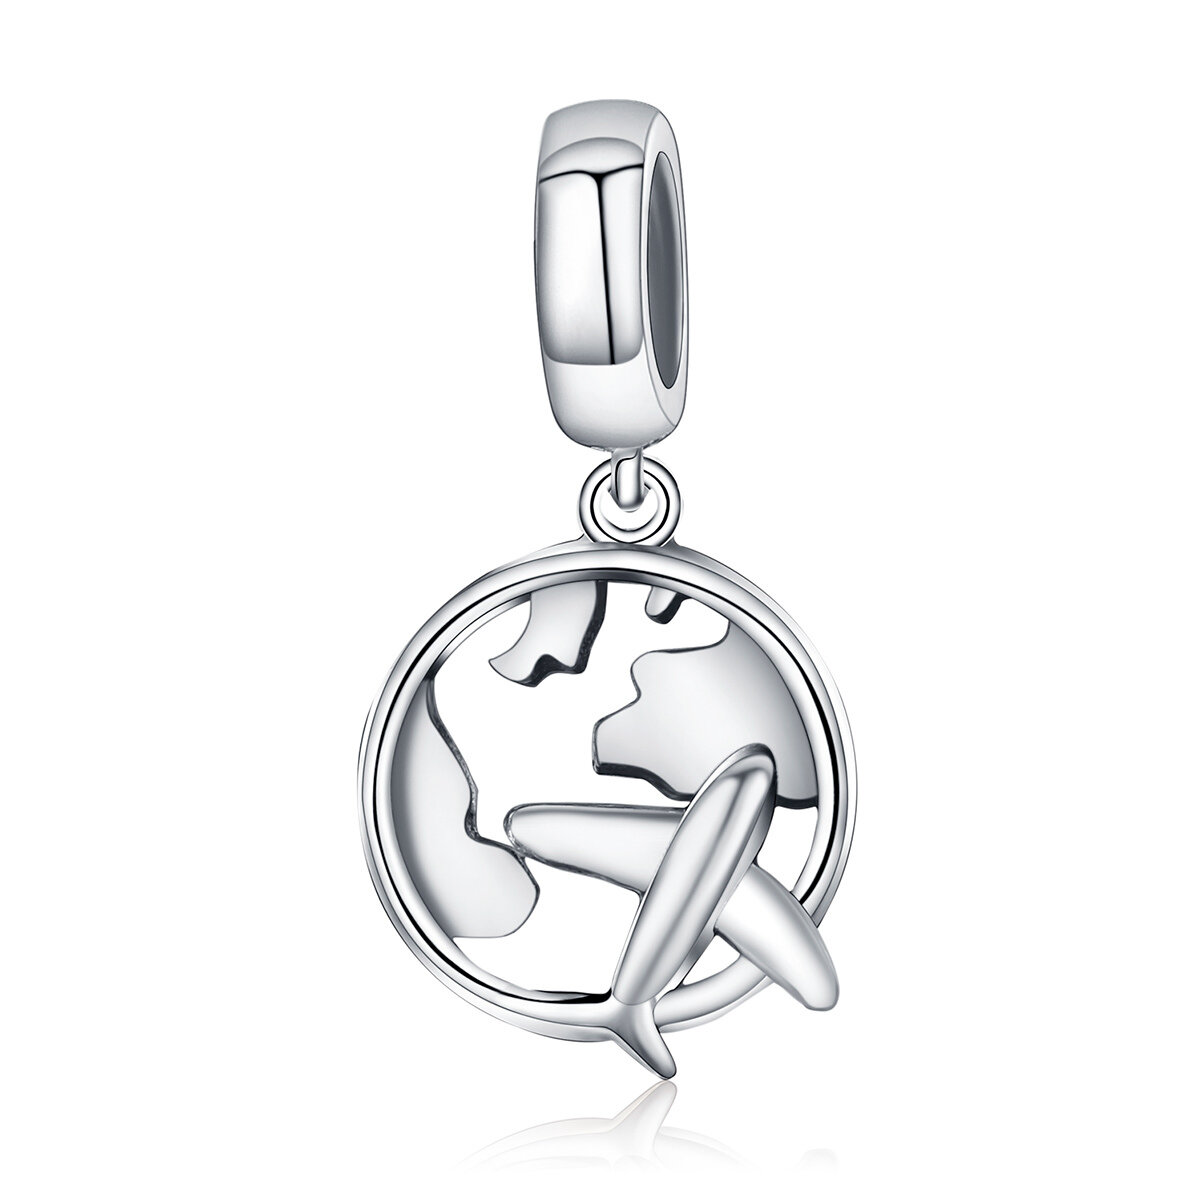 GemKing SCC242 The Dream of Traveling S925 Sterling Silver Charm